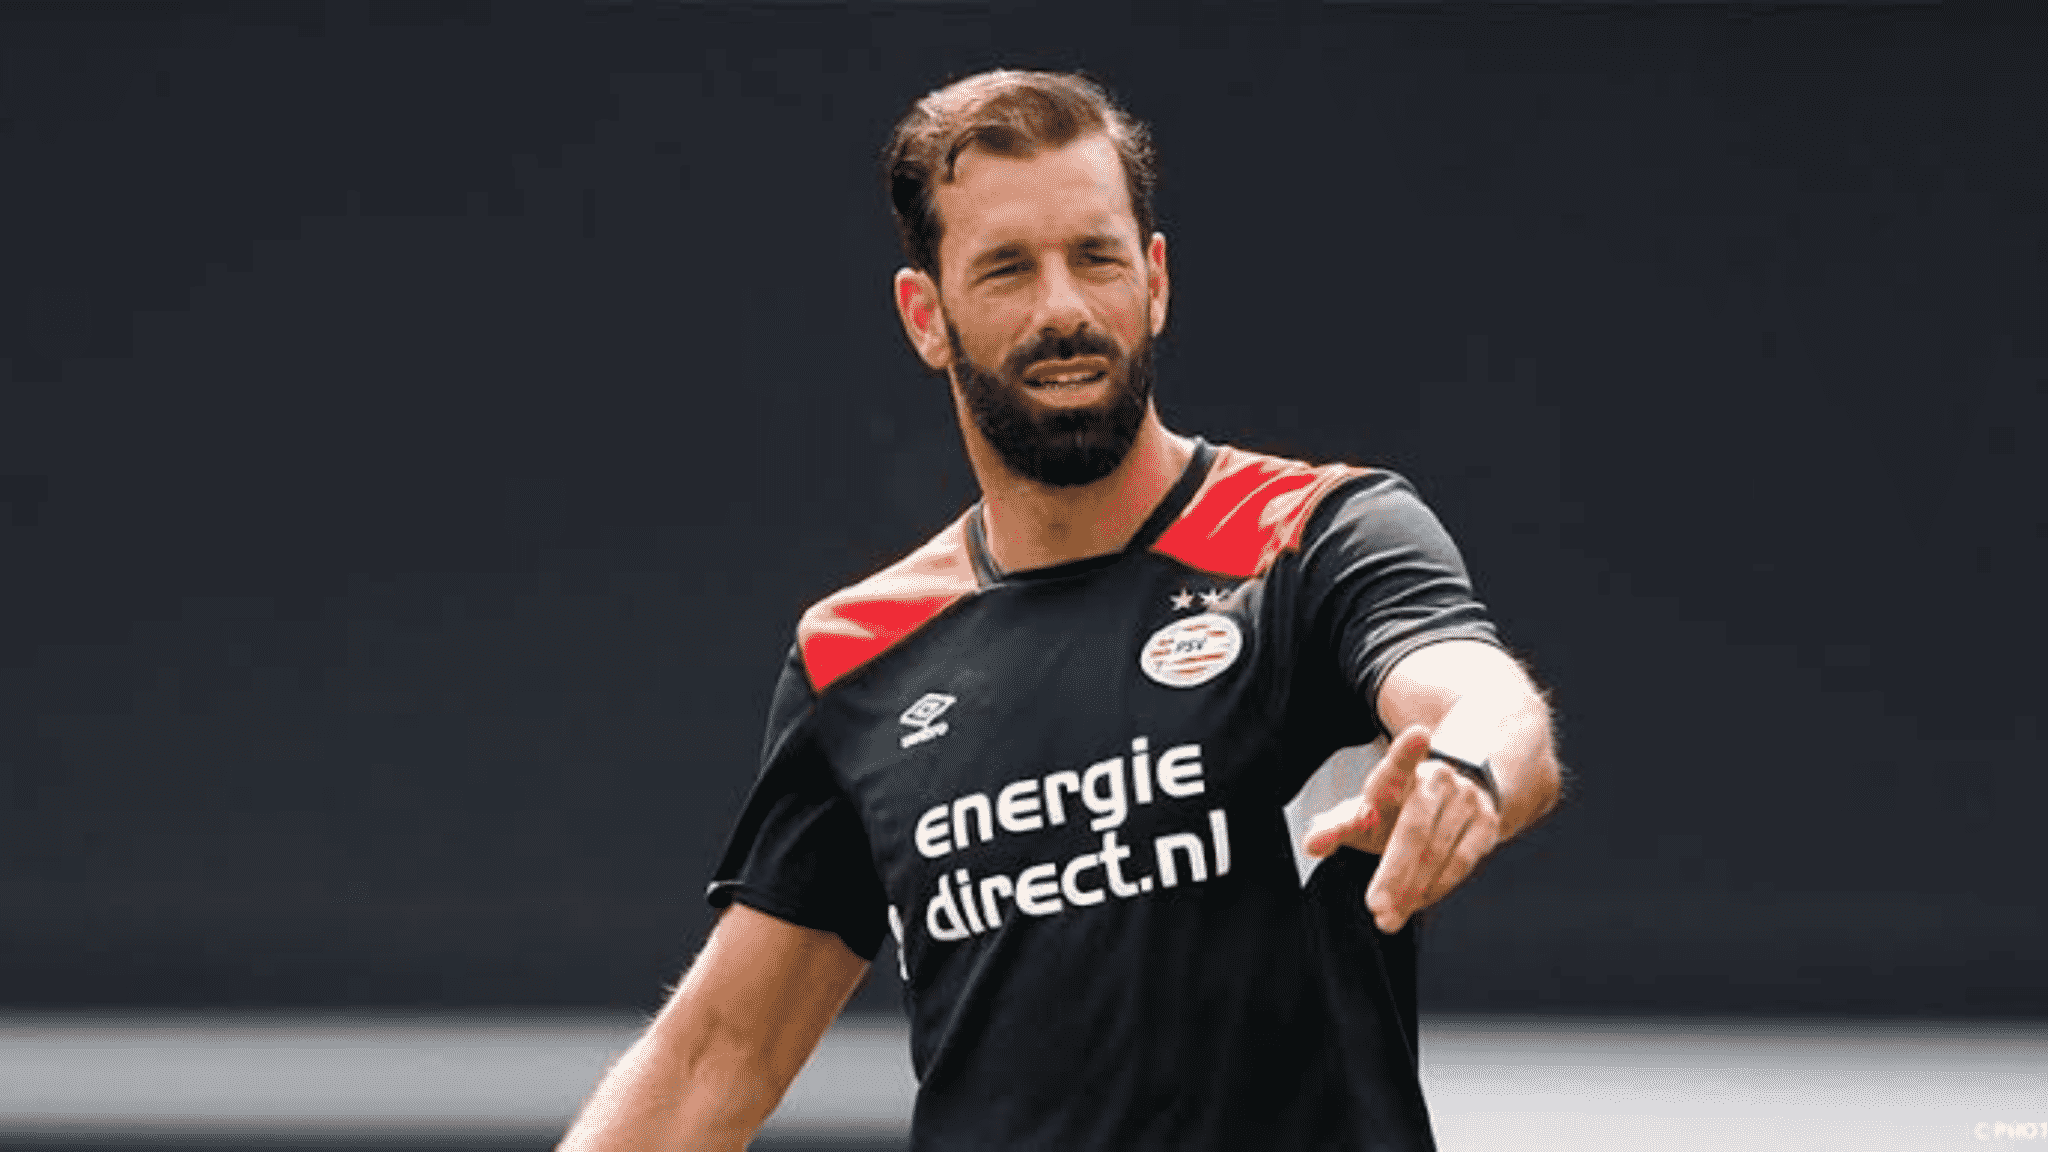 PSV Eindhoven Appoint Ruud van Nistelrooy as Head Coach for 2022-23 Season, My Football Facts